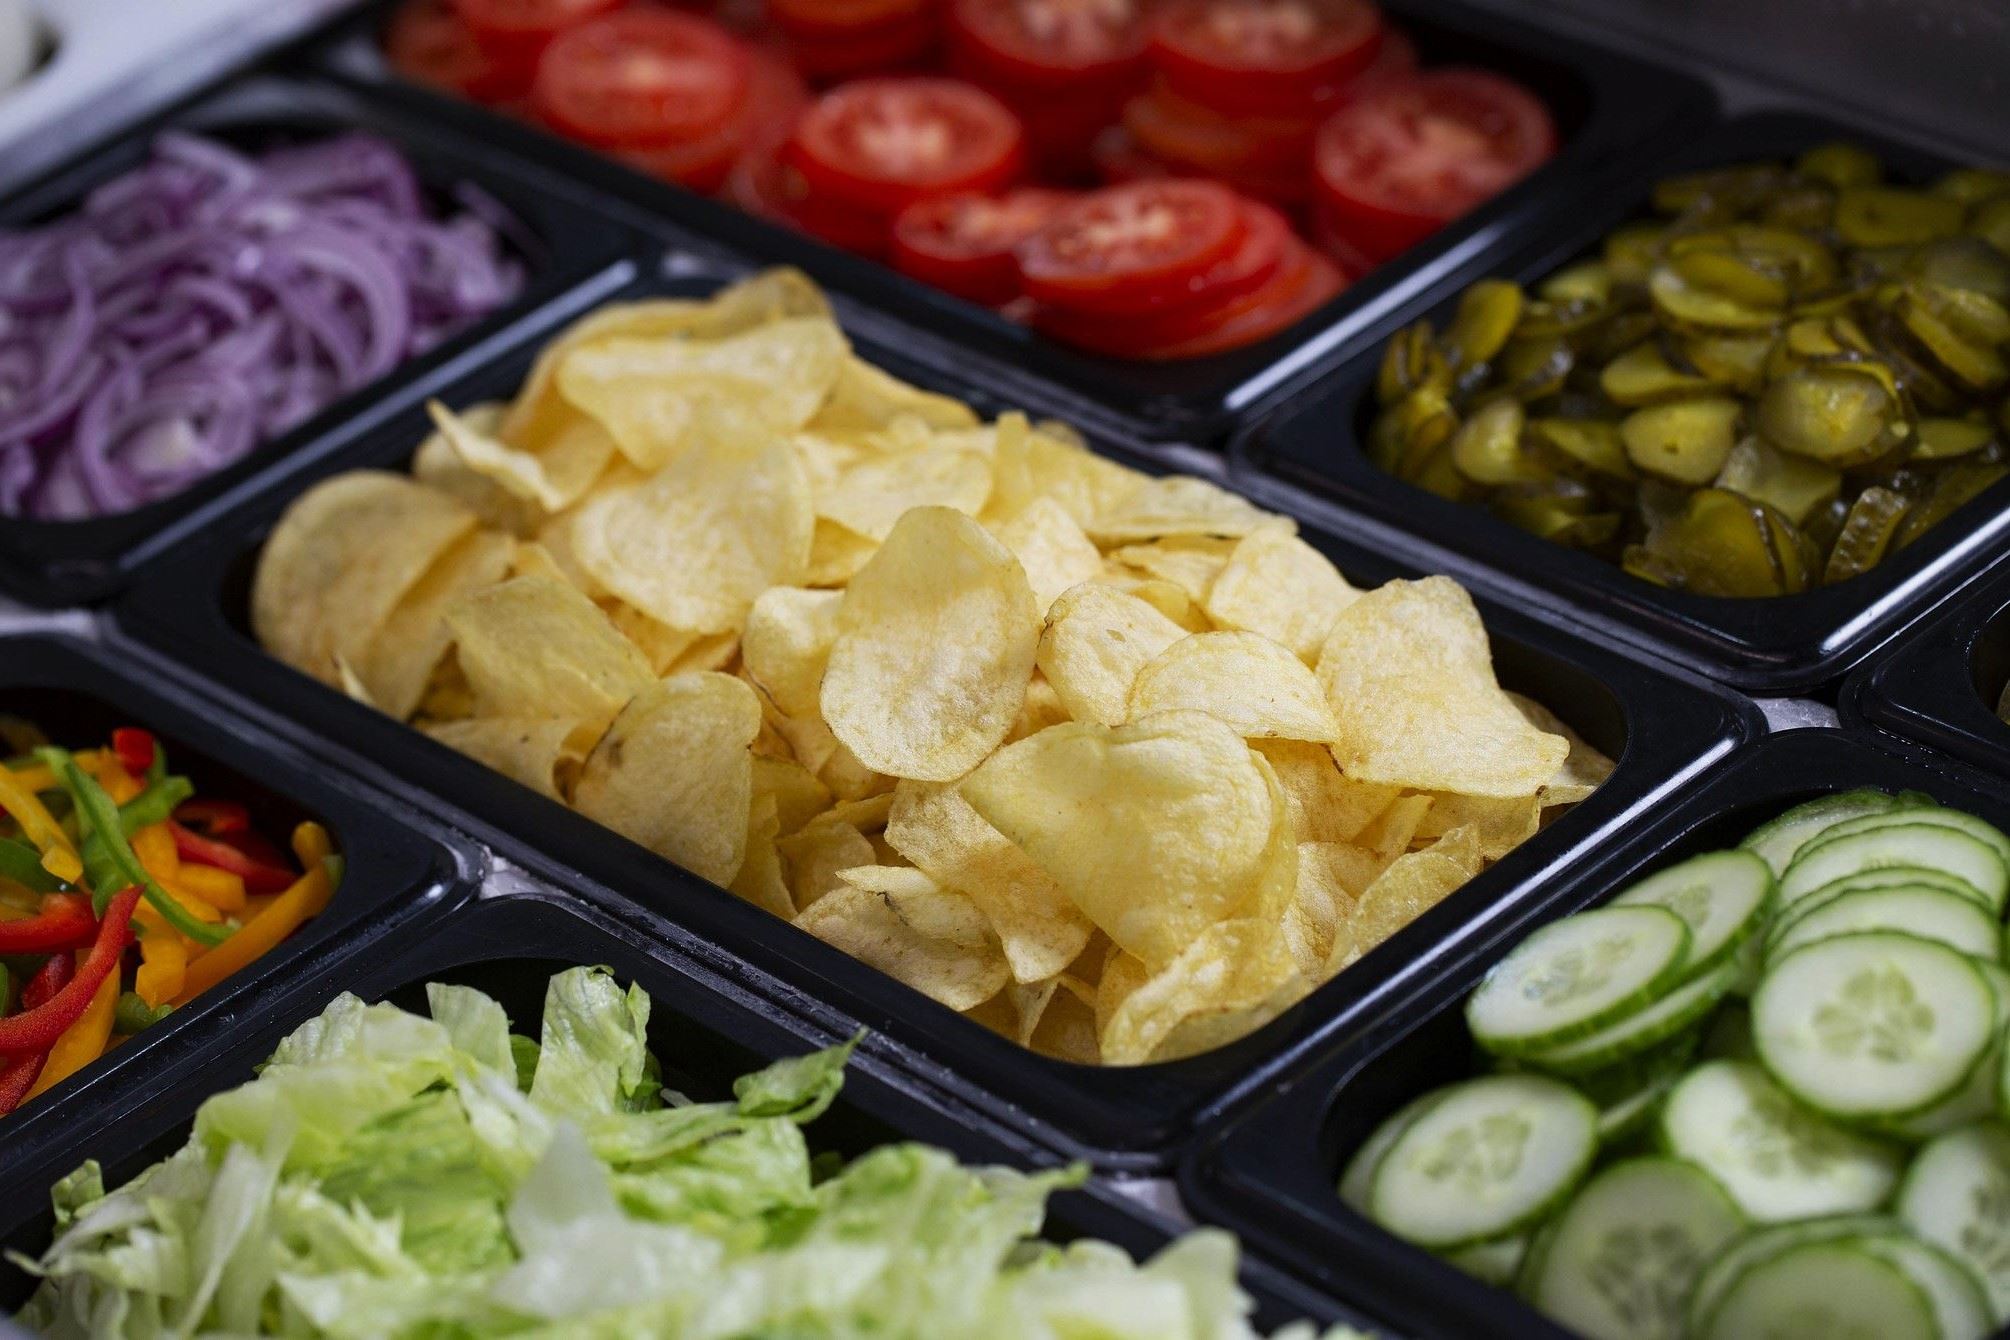 Discover The Ultimate Subway Toppings Menu!